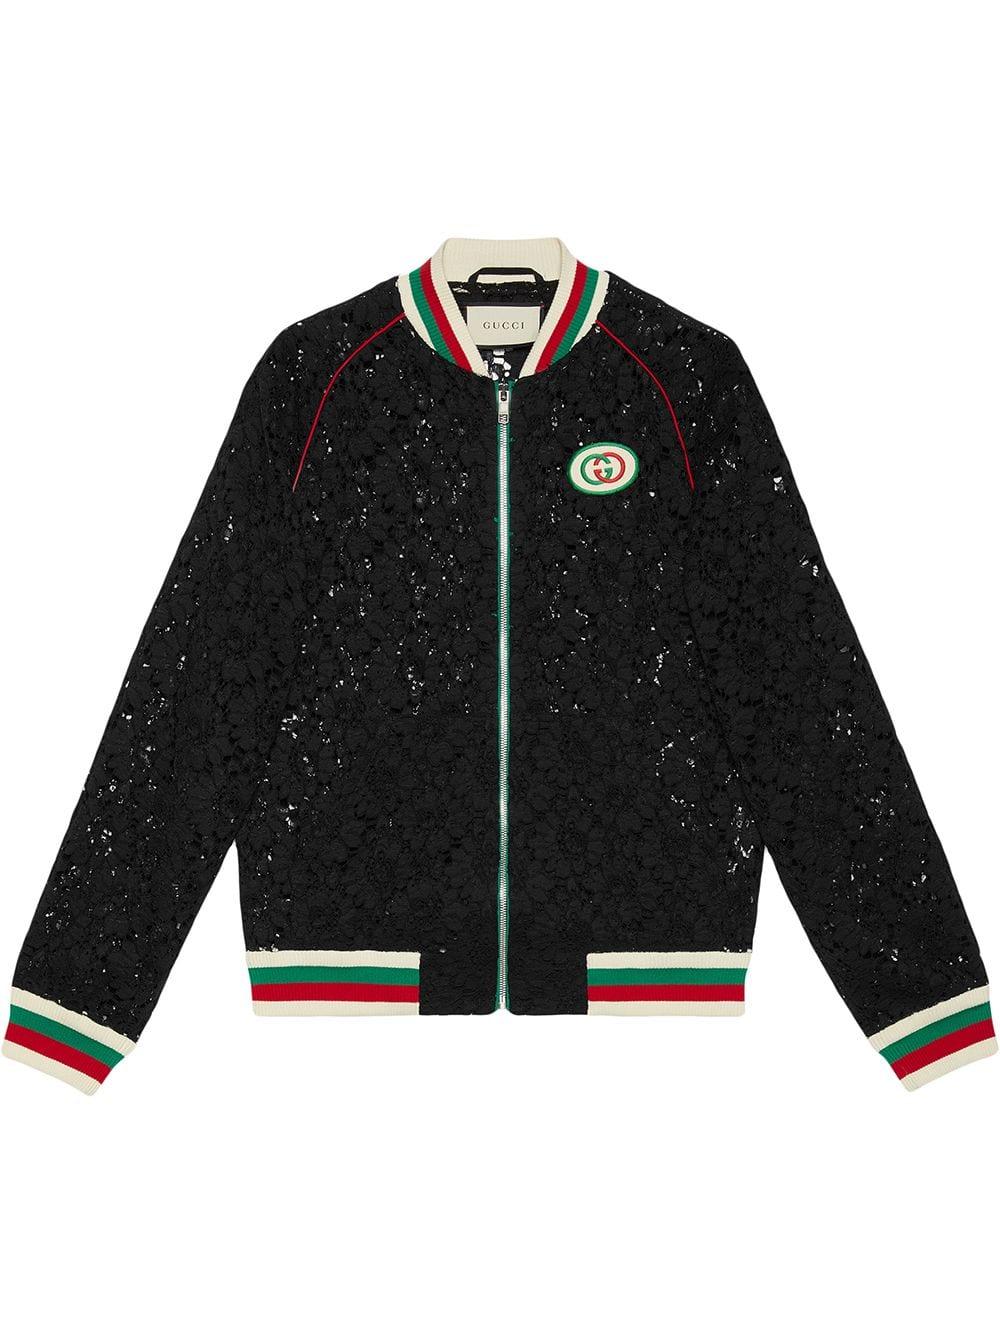 Gucci Floral Lace Bomber Jacket in Black | Lyst